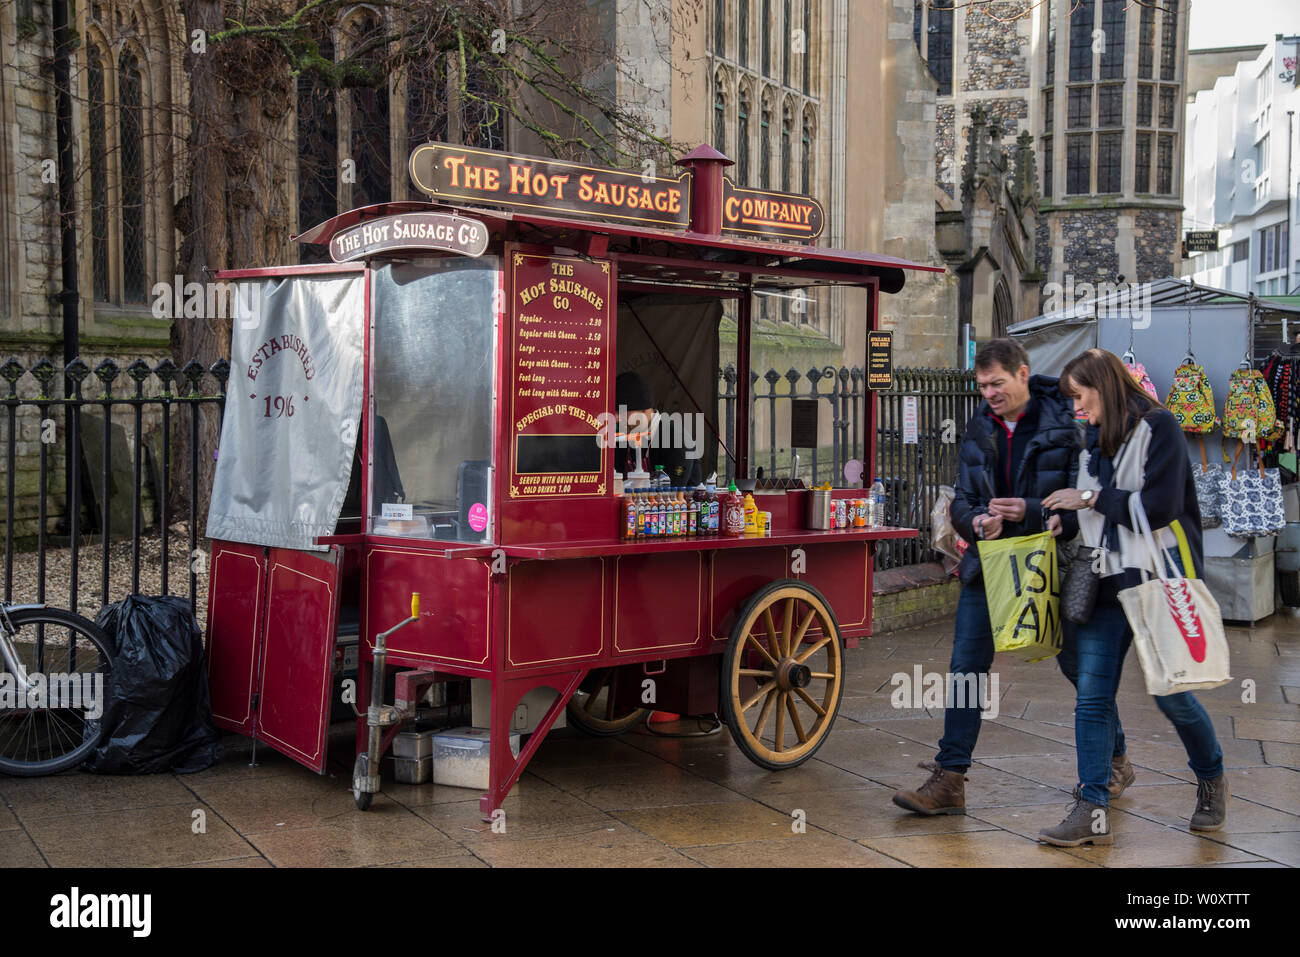 A wagoon selling hot dogs just outside St Andrew the Great Church in central Cambridge 2019 Stock Photo